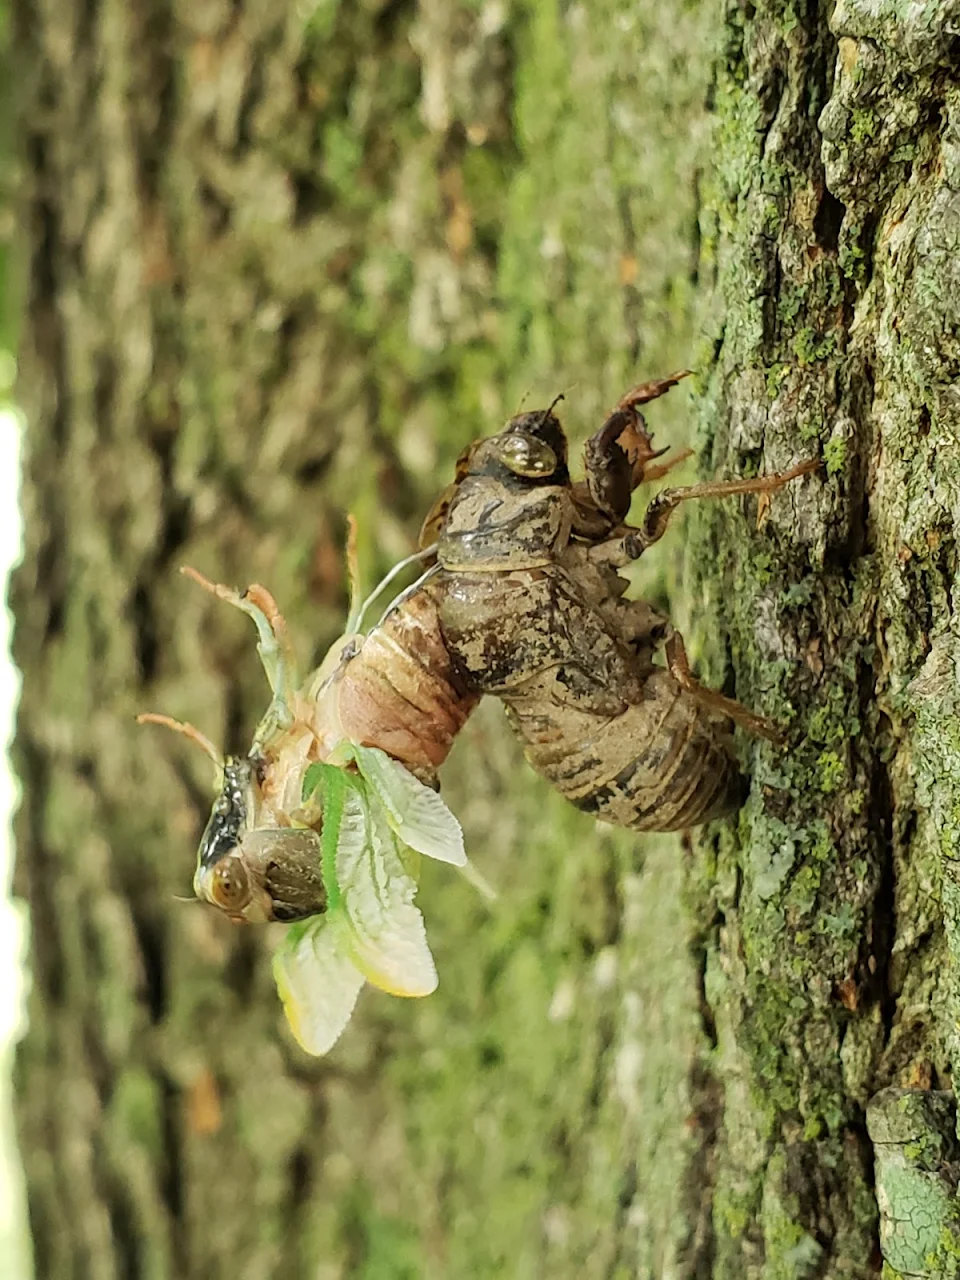 Came across this cicada molting on a tree while my son was searching for cicada shells.